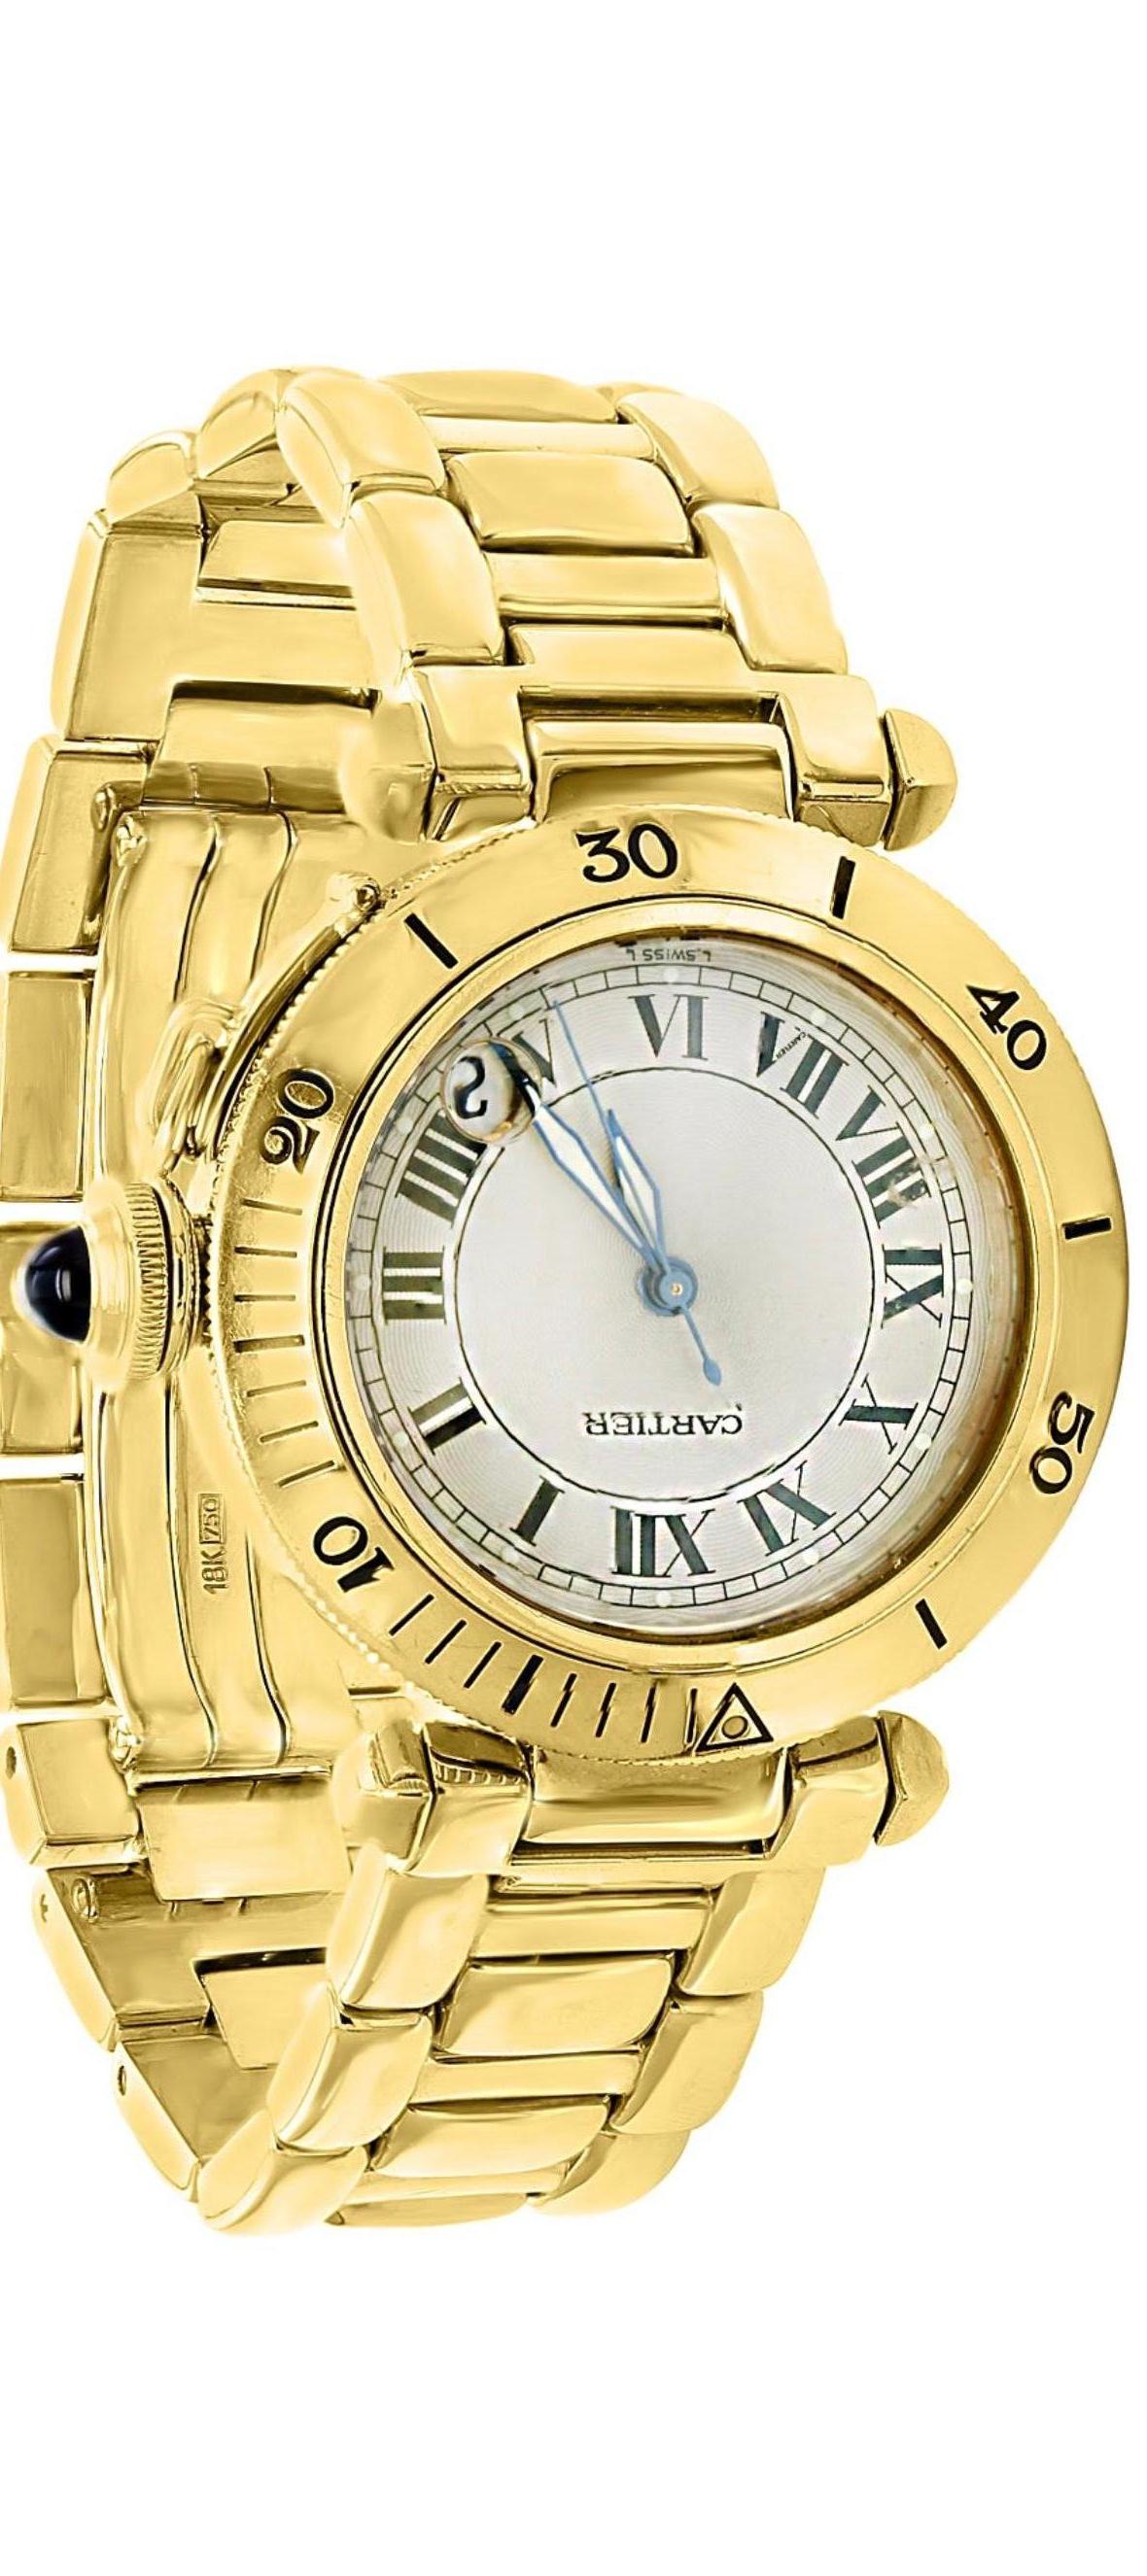 150 Gm 18 Karat Solid Yellow Gold Cartier  Pasha Automatic Watch 
Brand	Cartier
Model	Pasha
Water RESISTANT 330FT/100M
18k
1035
MG 235188
Case material	Yellow gold
Bracelet material	Yellow Gold
Gender	Men's watch/Unisex
Movement	Automatic
Case